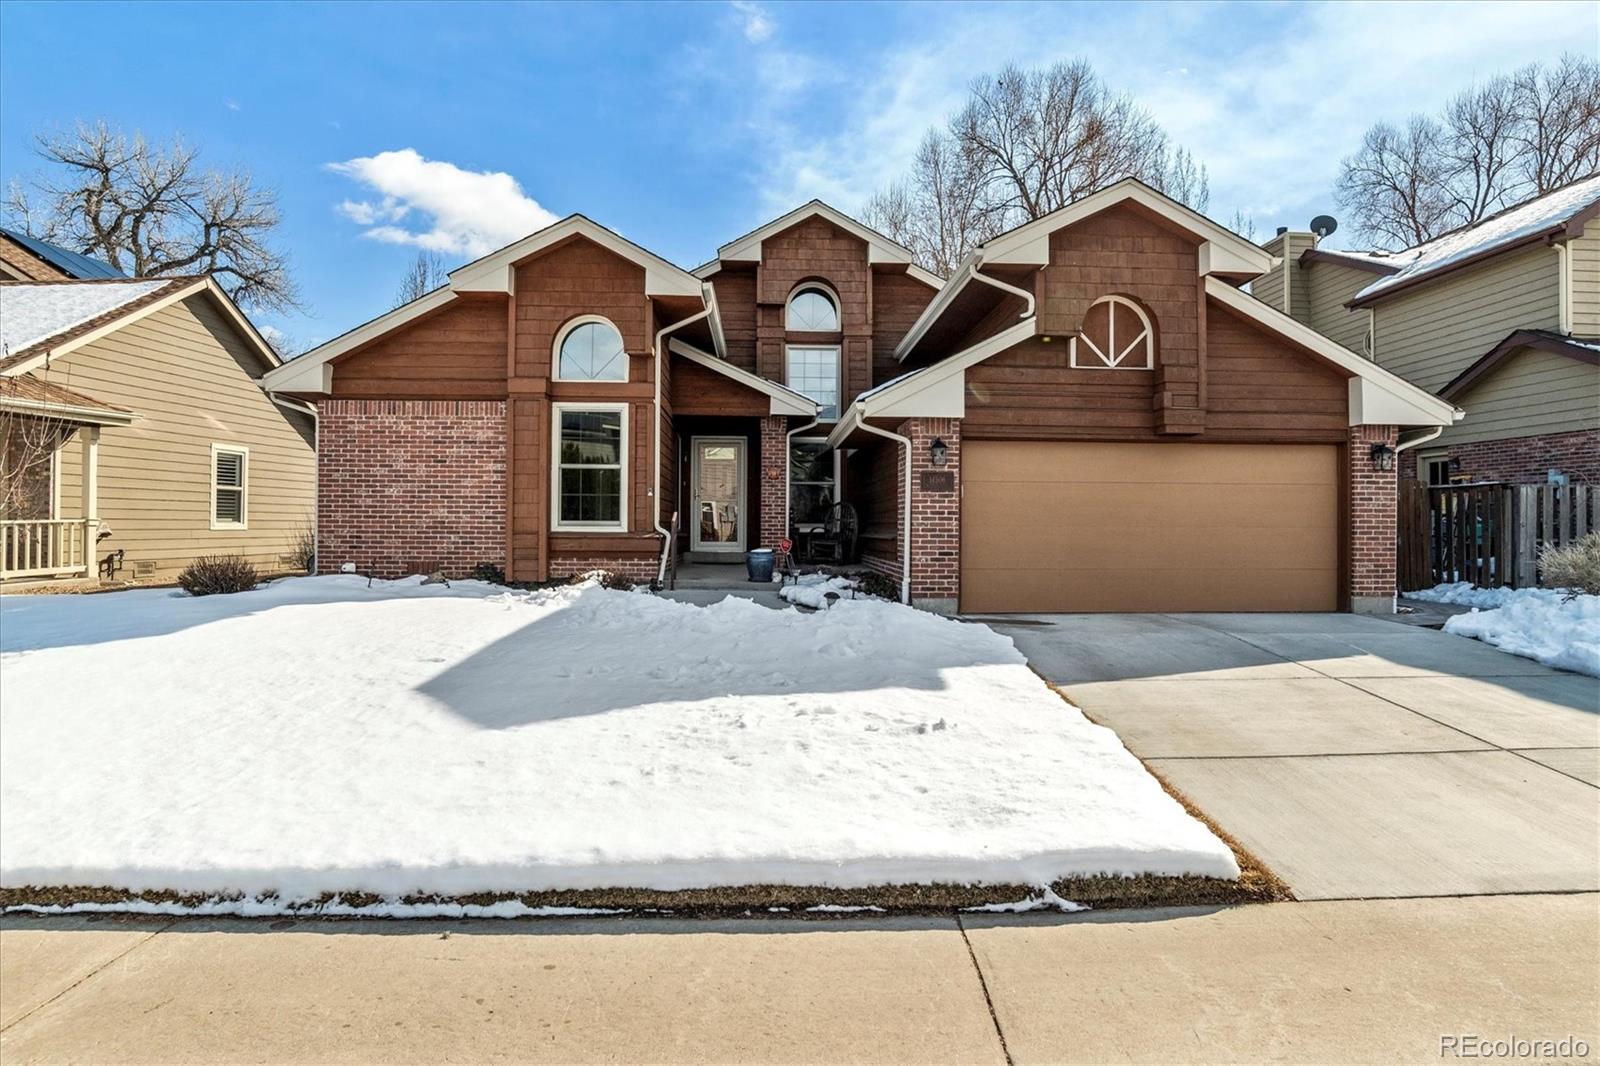 Report Image for 14506 W 68th Place,Arvada, Colorado